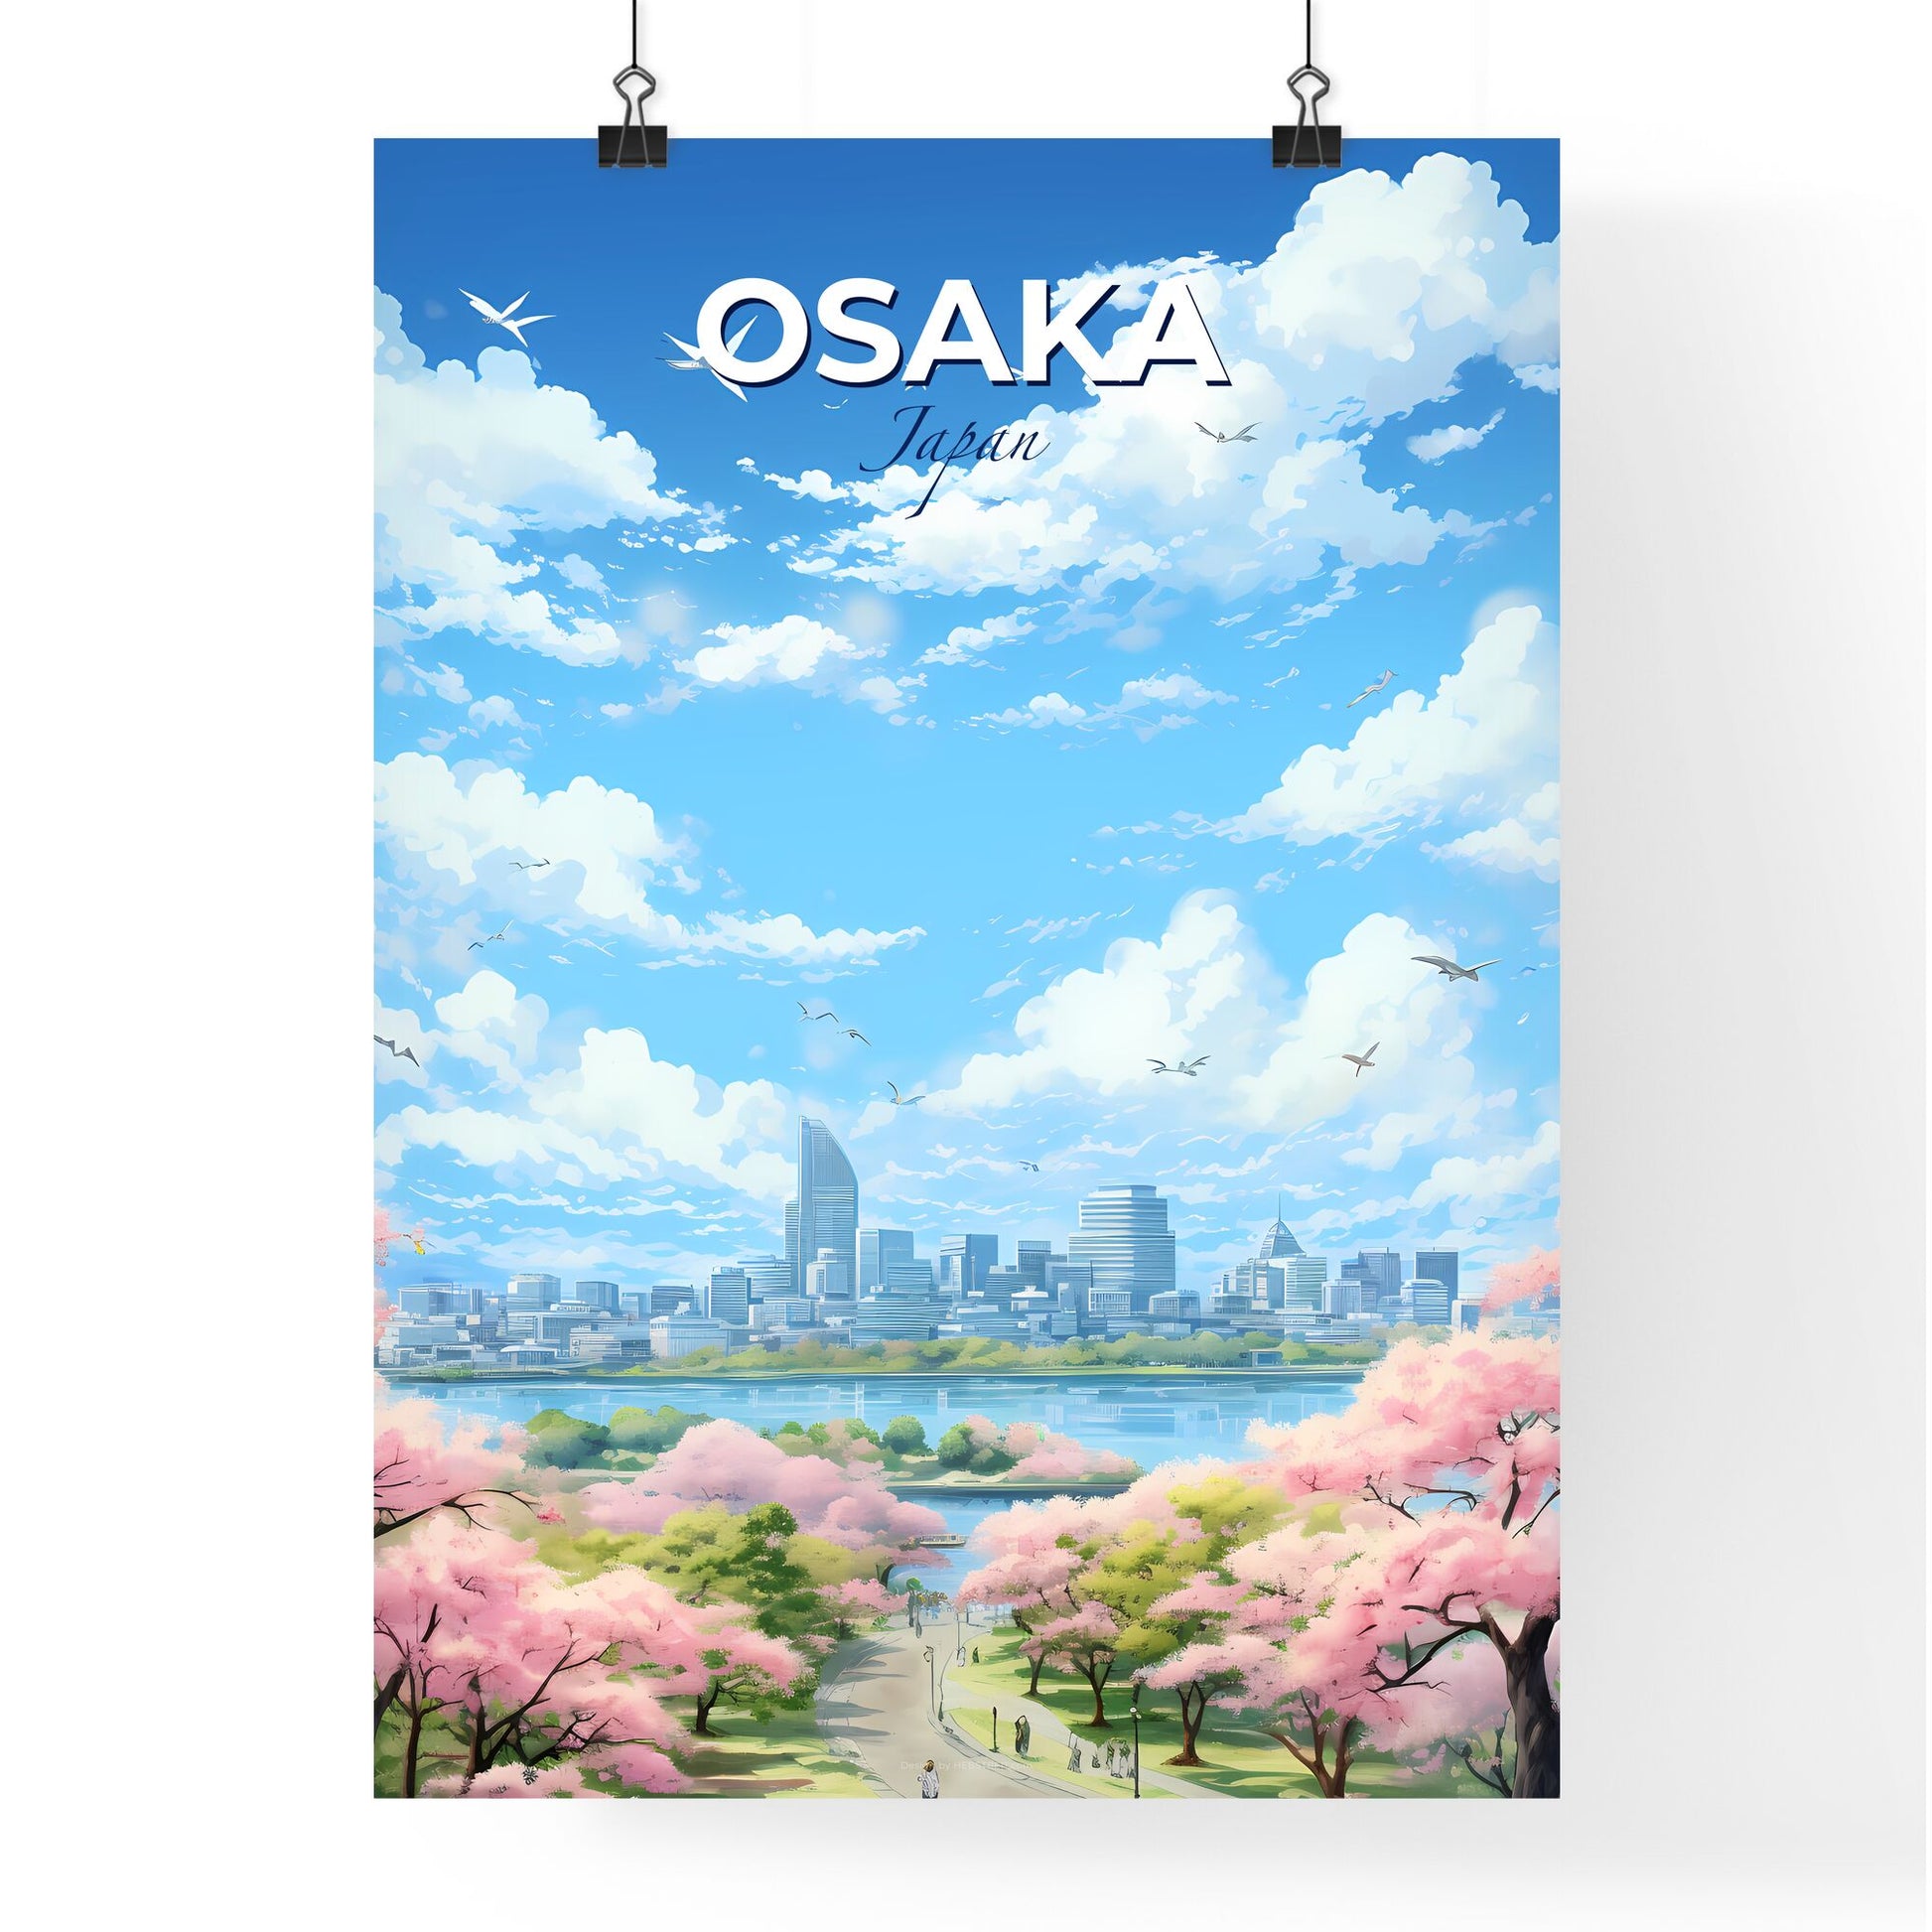 Osaka Japan Skyline - A City With Pink Flowers And Birds Flying Over Water - Customizable Travel Gift Default Title